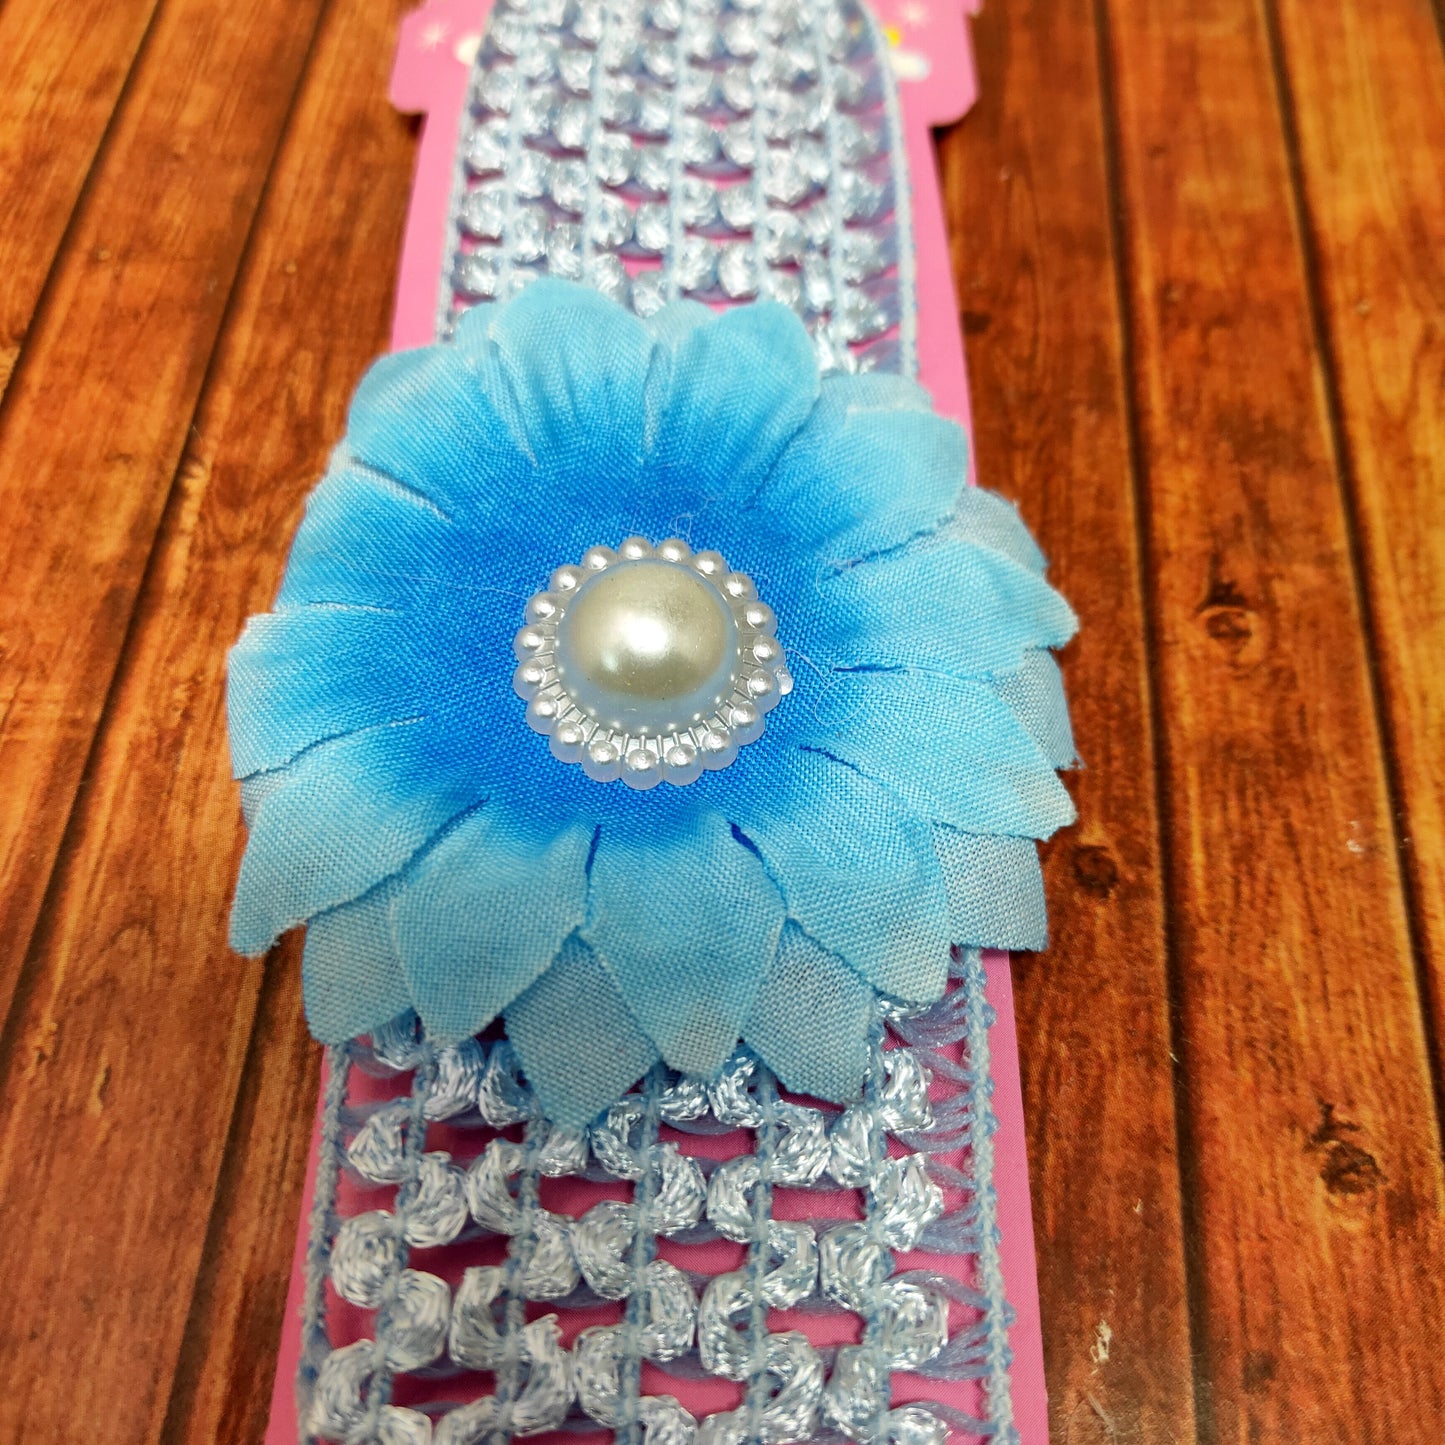 Floral Soft Stretchy Headbands for Baby Girls and Newborn (17-04 Sky Blue Baby Headband)